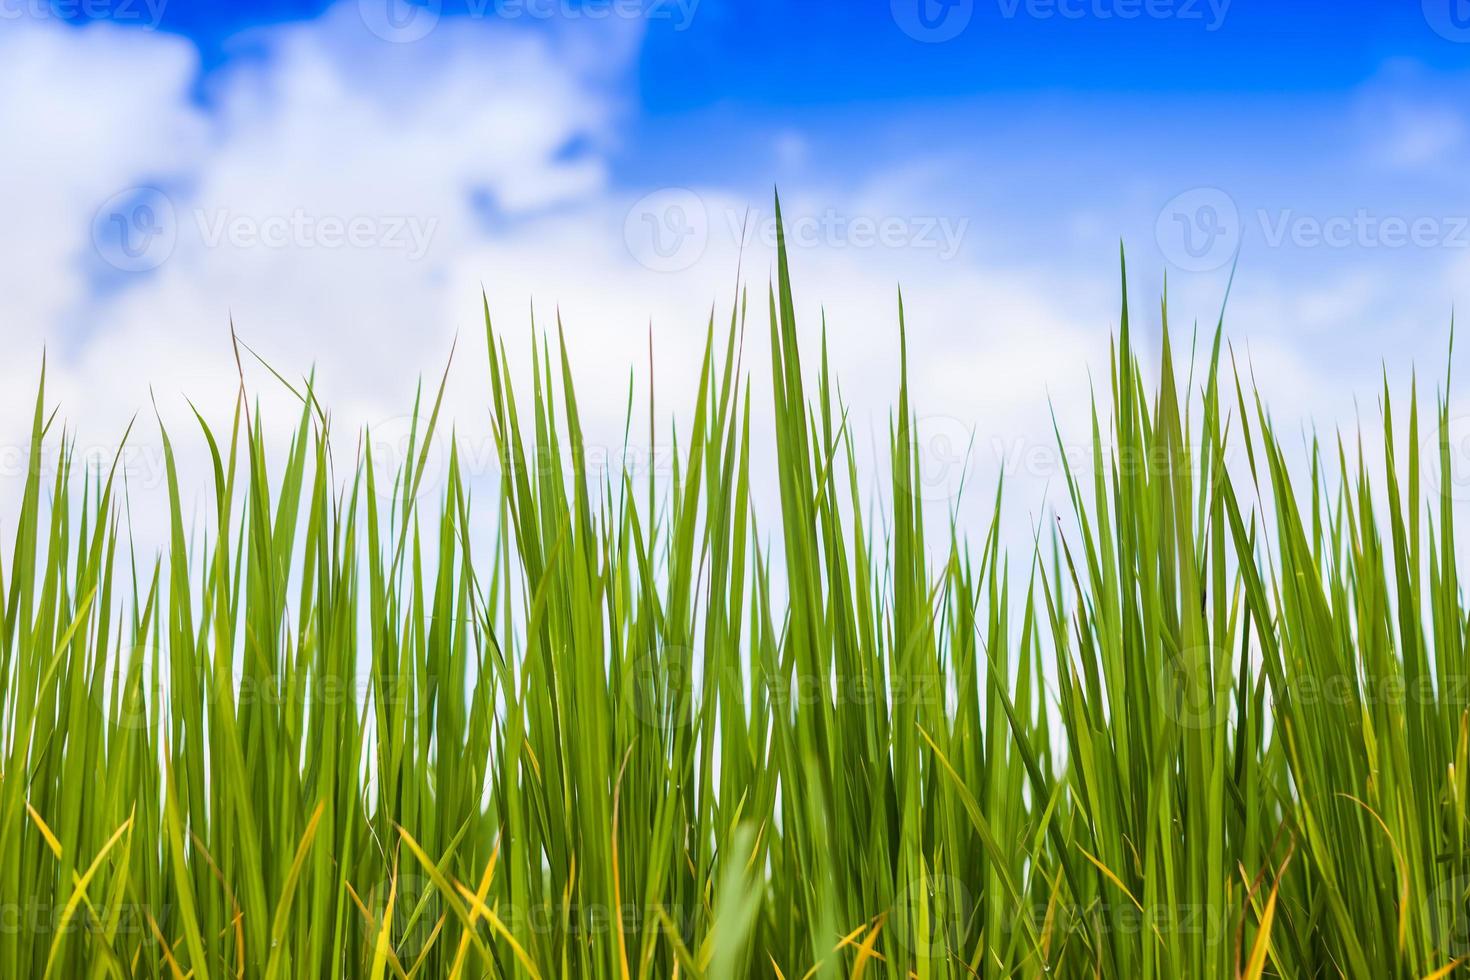 Close-up of grass with a blue sky photo